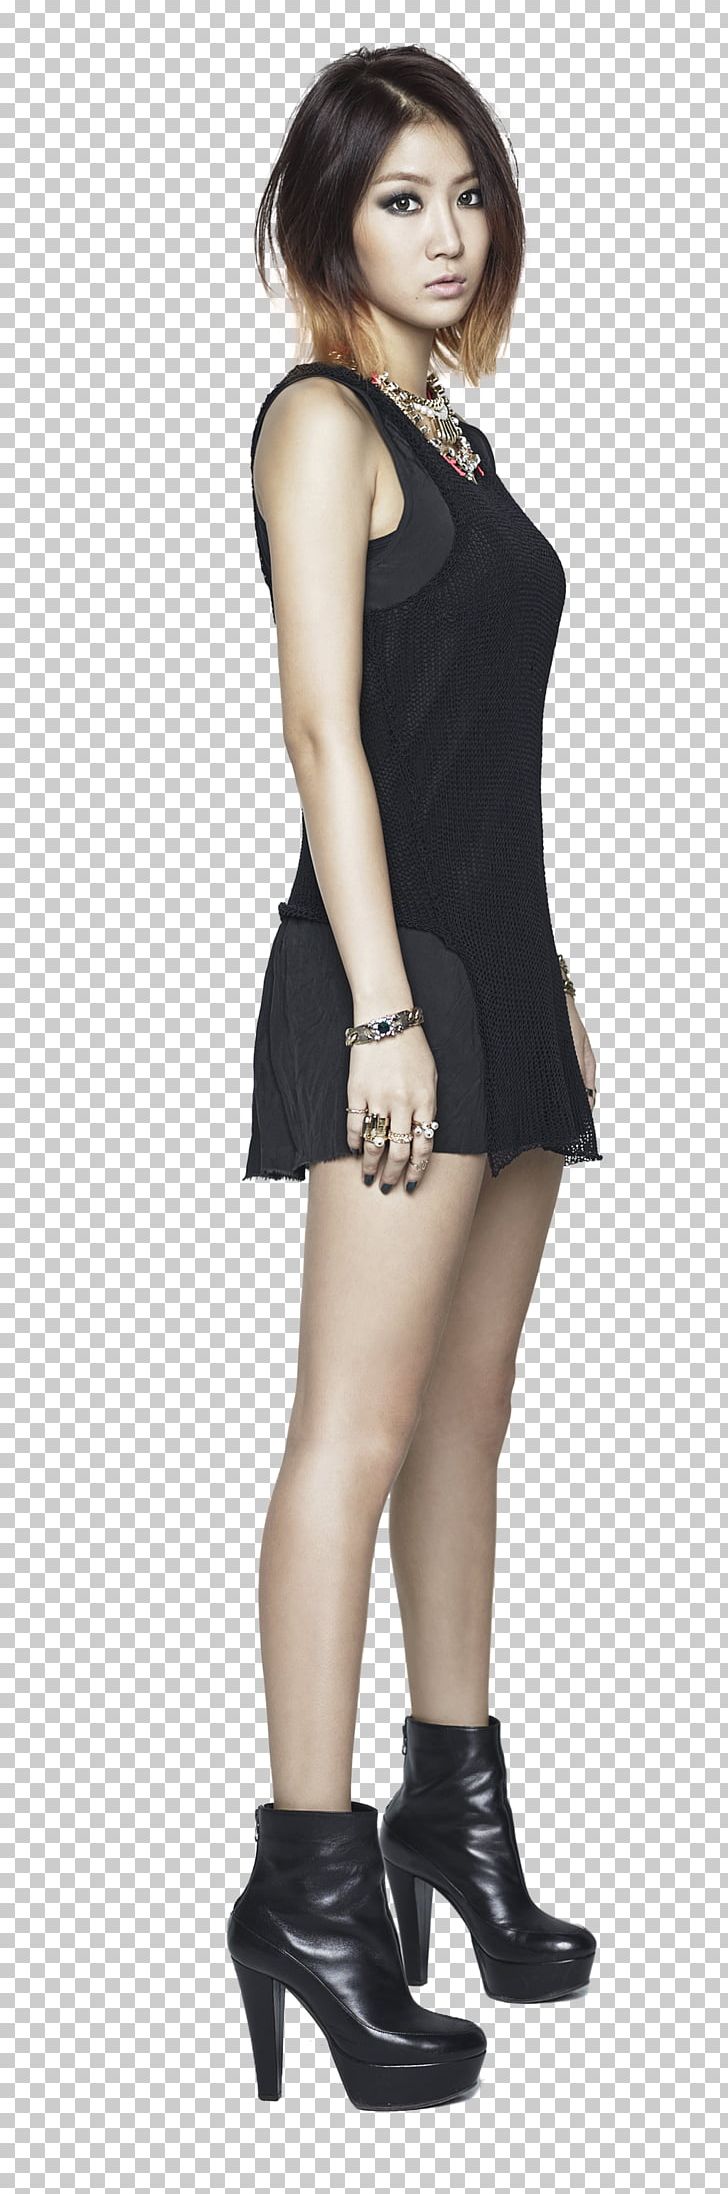 Soyou Sistar Starship Entertainment Miss A Stupid In Love PNG, Clipart, Art, Black Hair, Brown Hair, Clothing, Cocktail Dress Free PNG Download